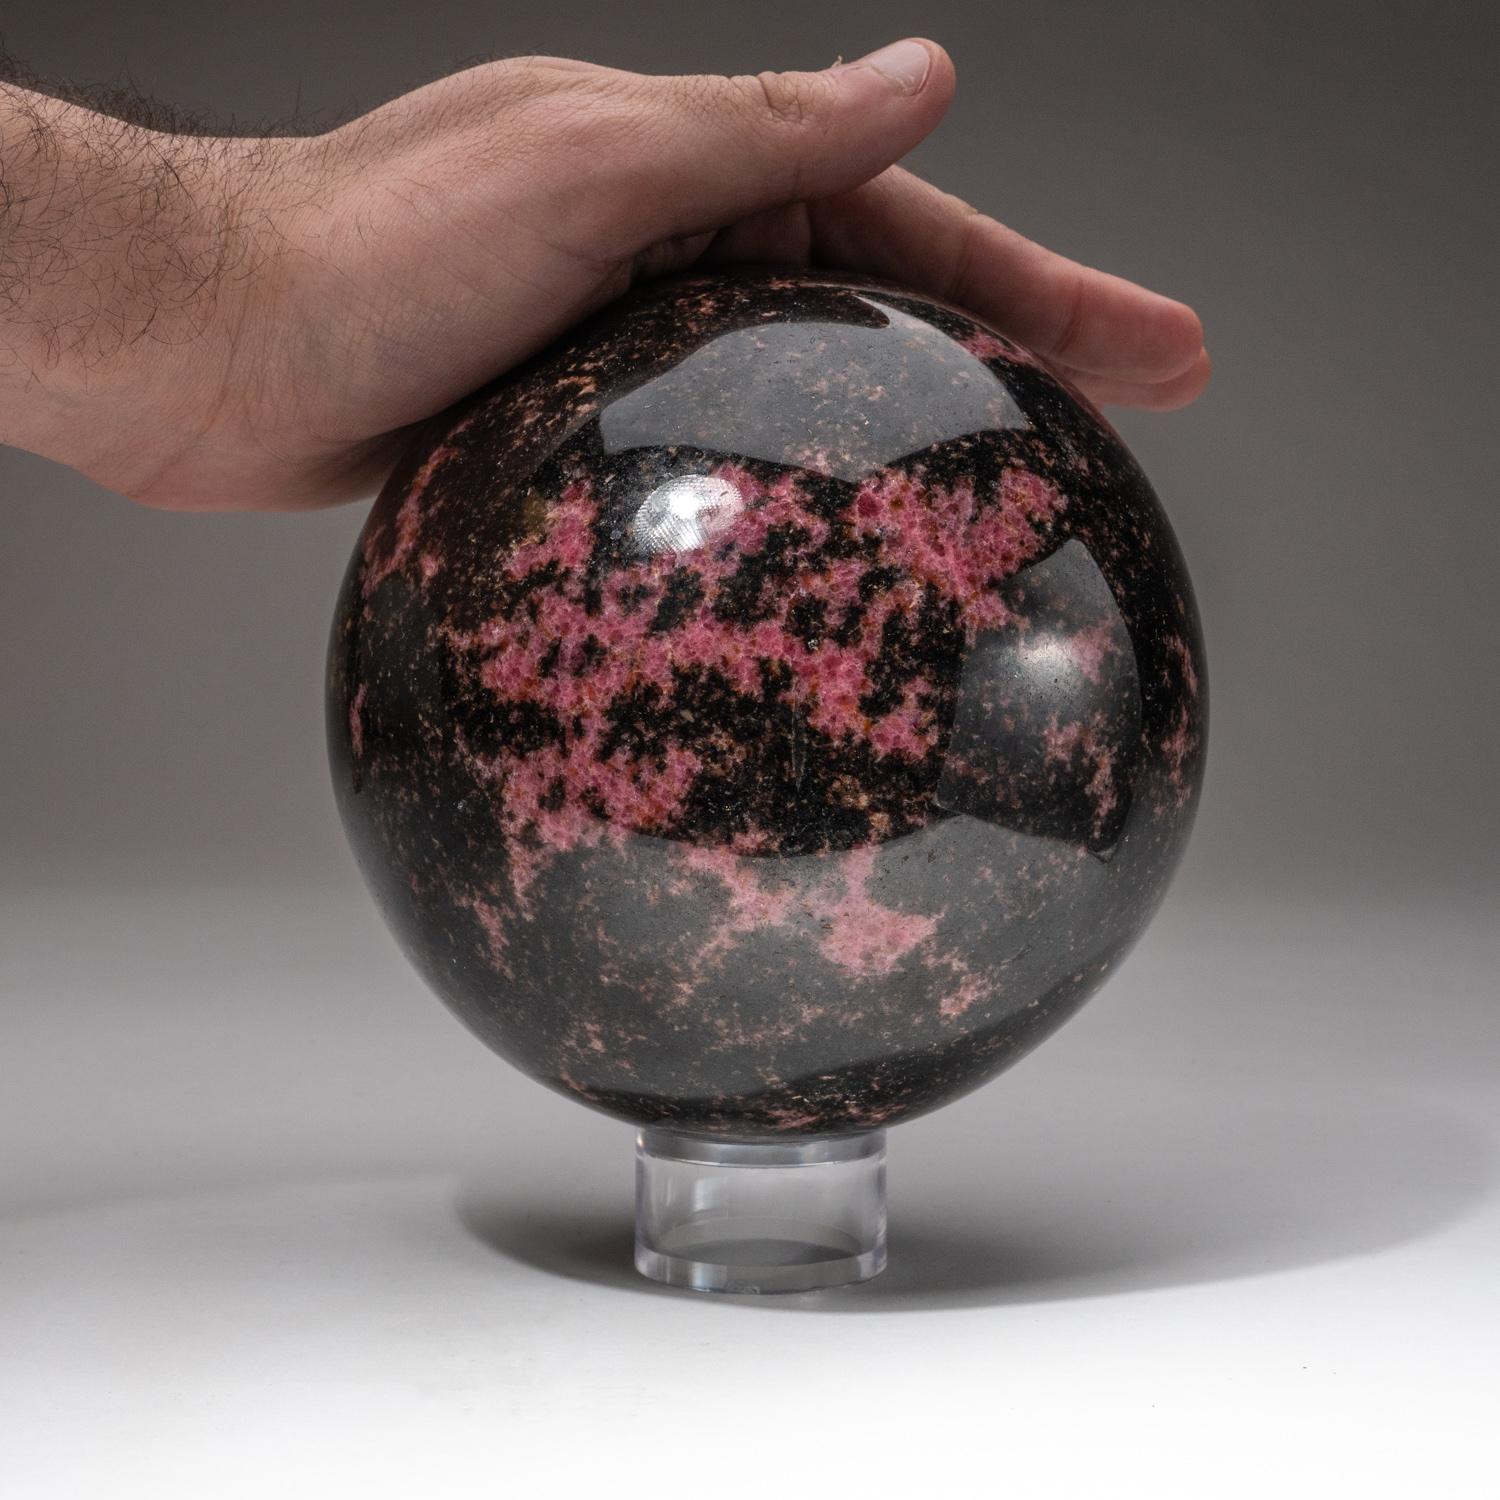 Malagasy Large Polished Imperial Rhodonite Sphere from Madagascar (5.25'', 11.4 lbs) For Sale